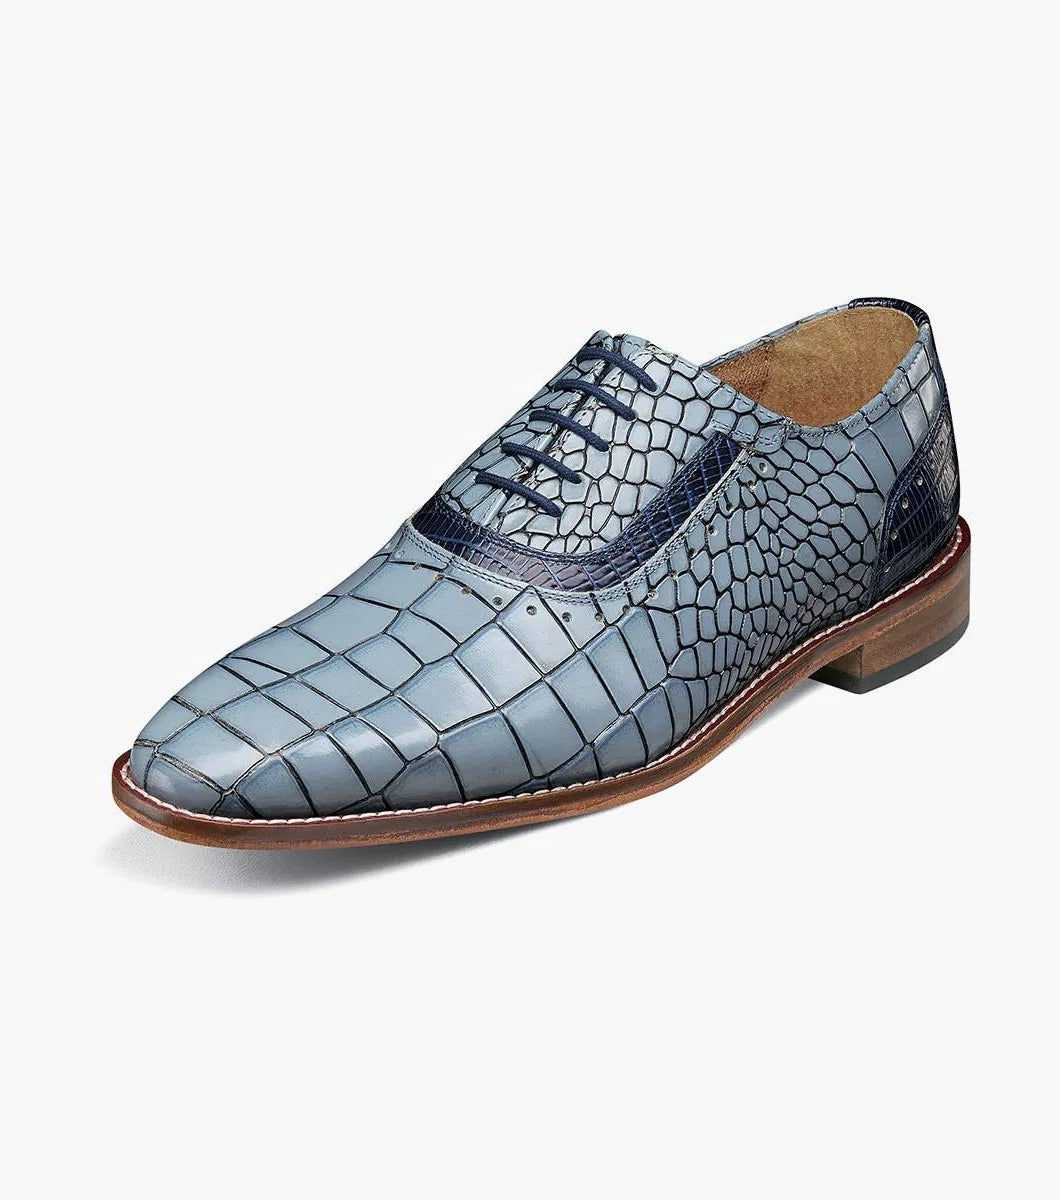 Stacy Adams RICCARDI Plain Toe Oxford Color: Light Blue Multi Available in Sizes 7-15